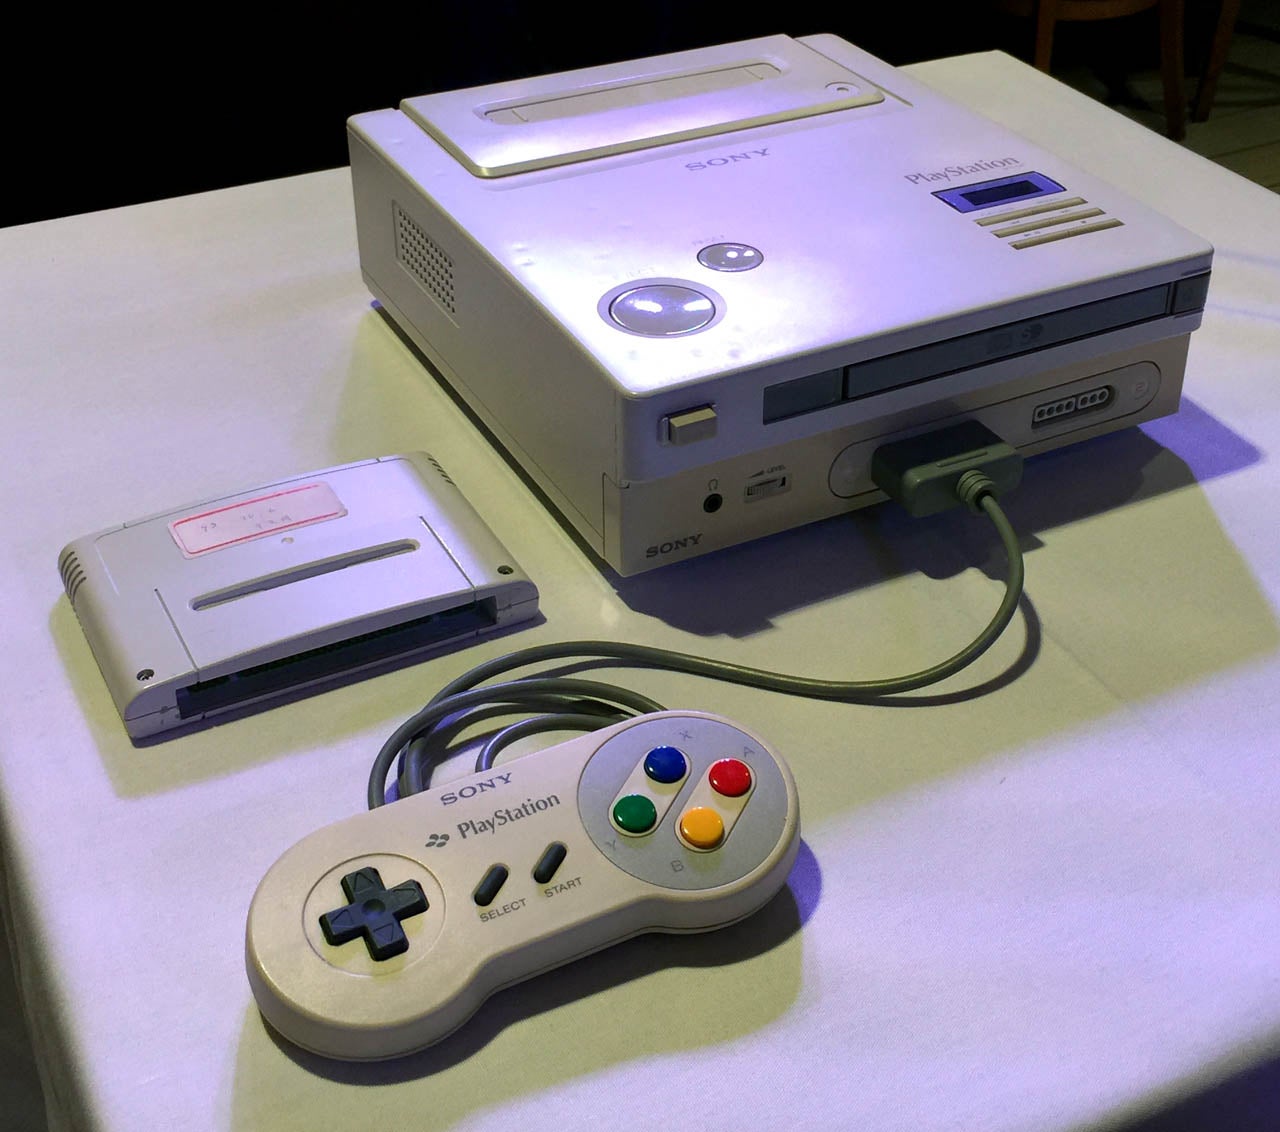 Image for Nintendo PlayStation Grabbed Headlines, But Support for Preservation Remains "Dismal at Best"